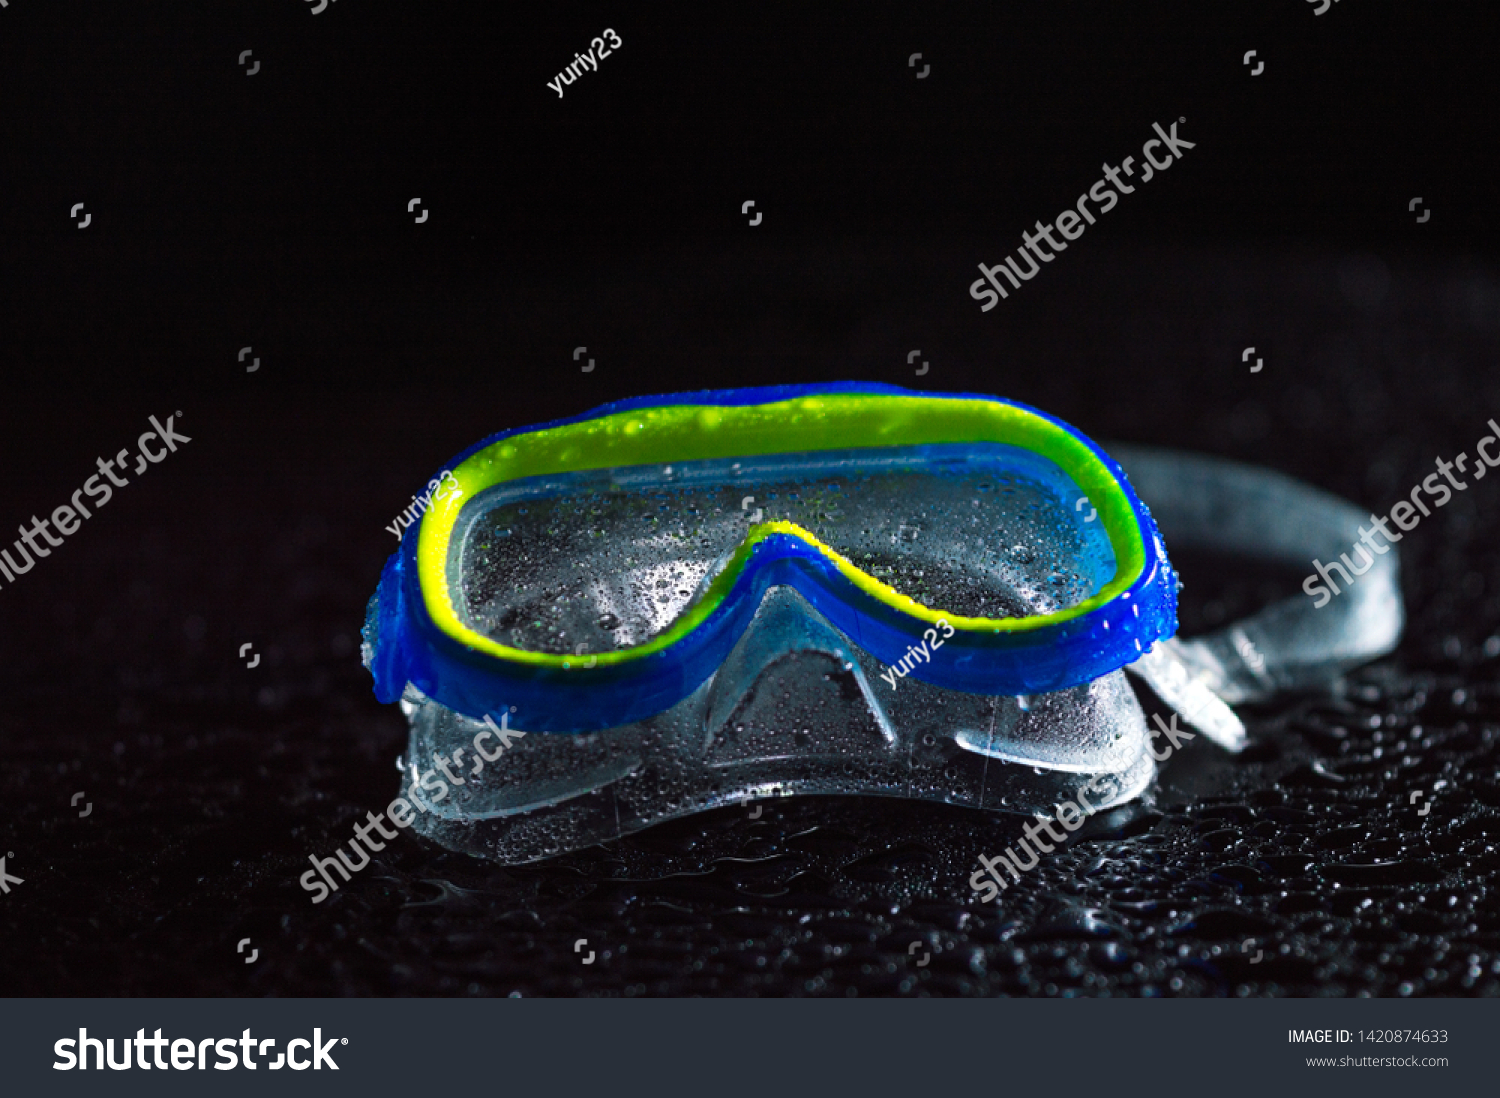 goggles for immersion in the summer in the sea or in the pool; transparent blue and green colors can be taken on rest or on a trip to look at the depths of reservoirs #1420874633